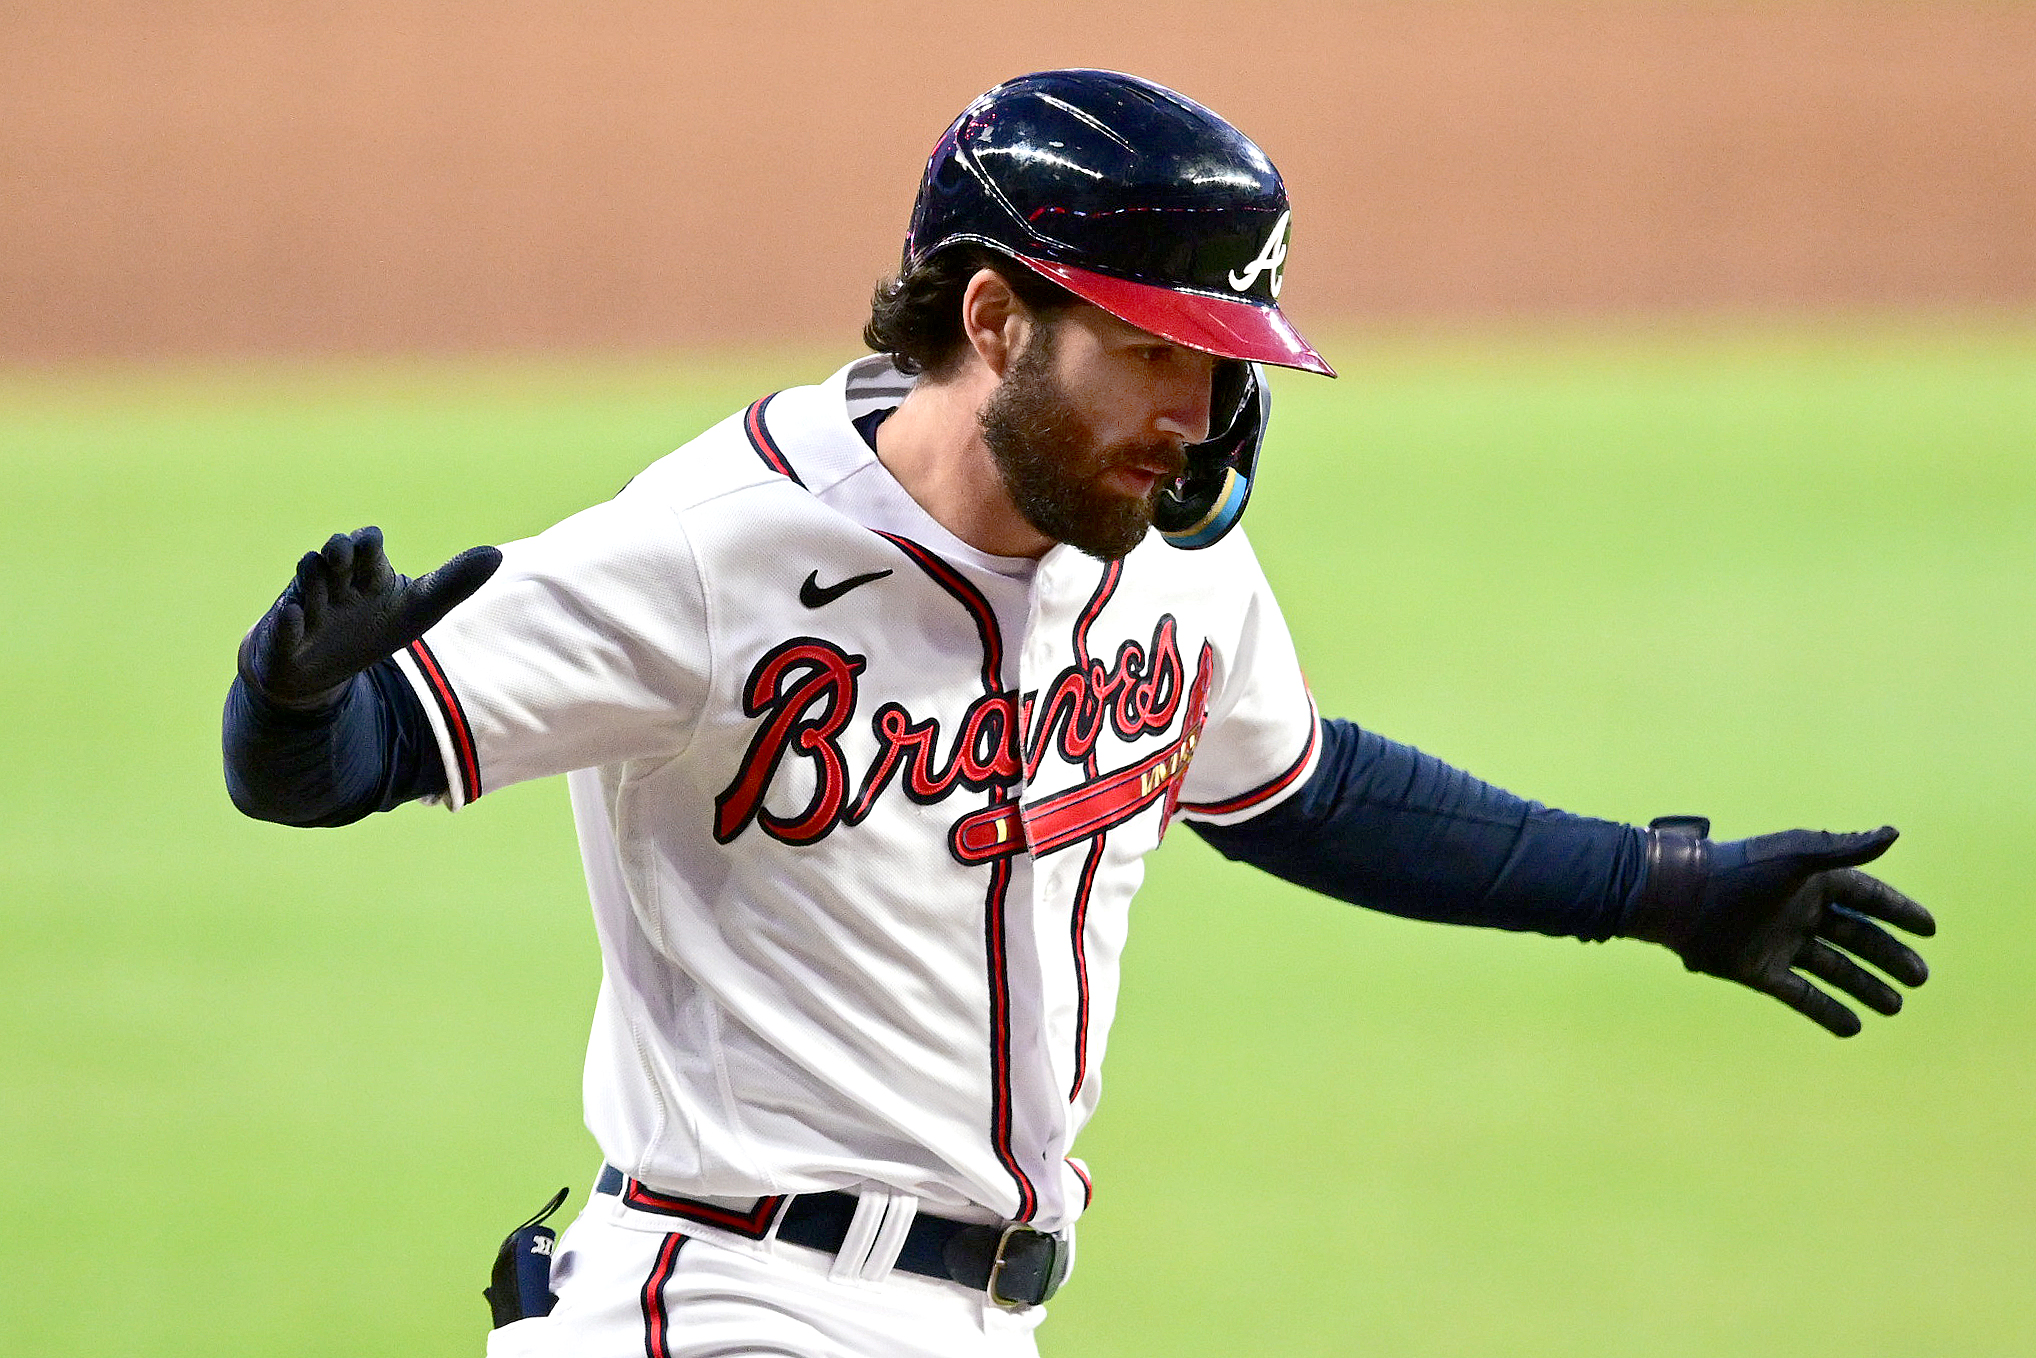 Dansby Swanson celebrates after hitting a home run